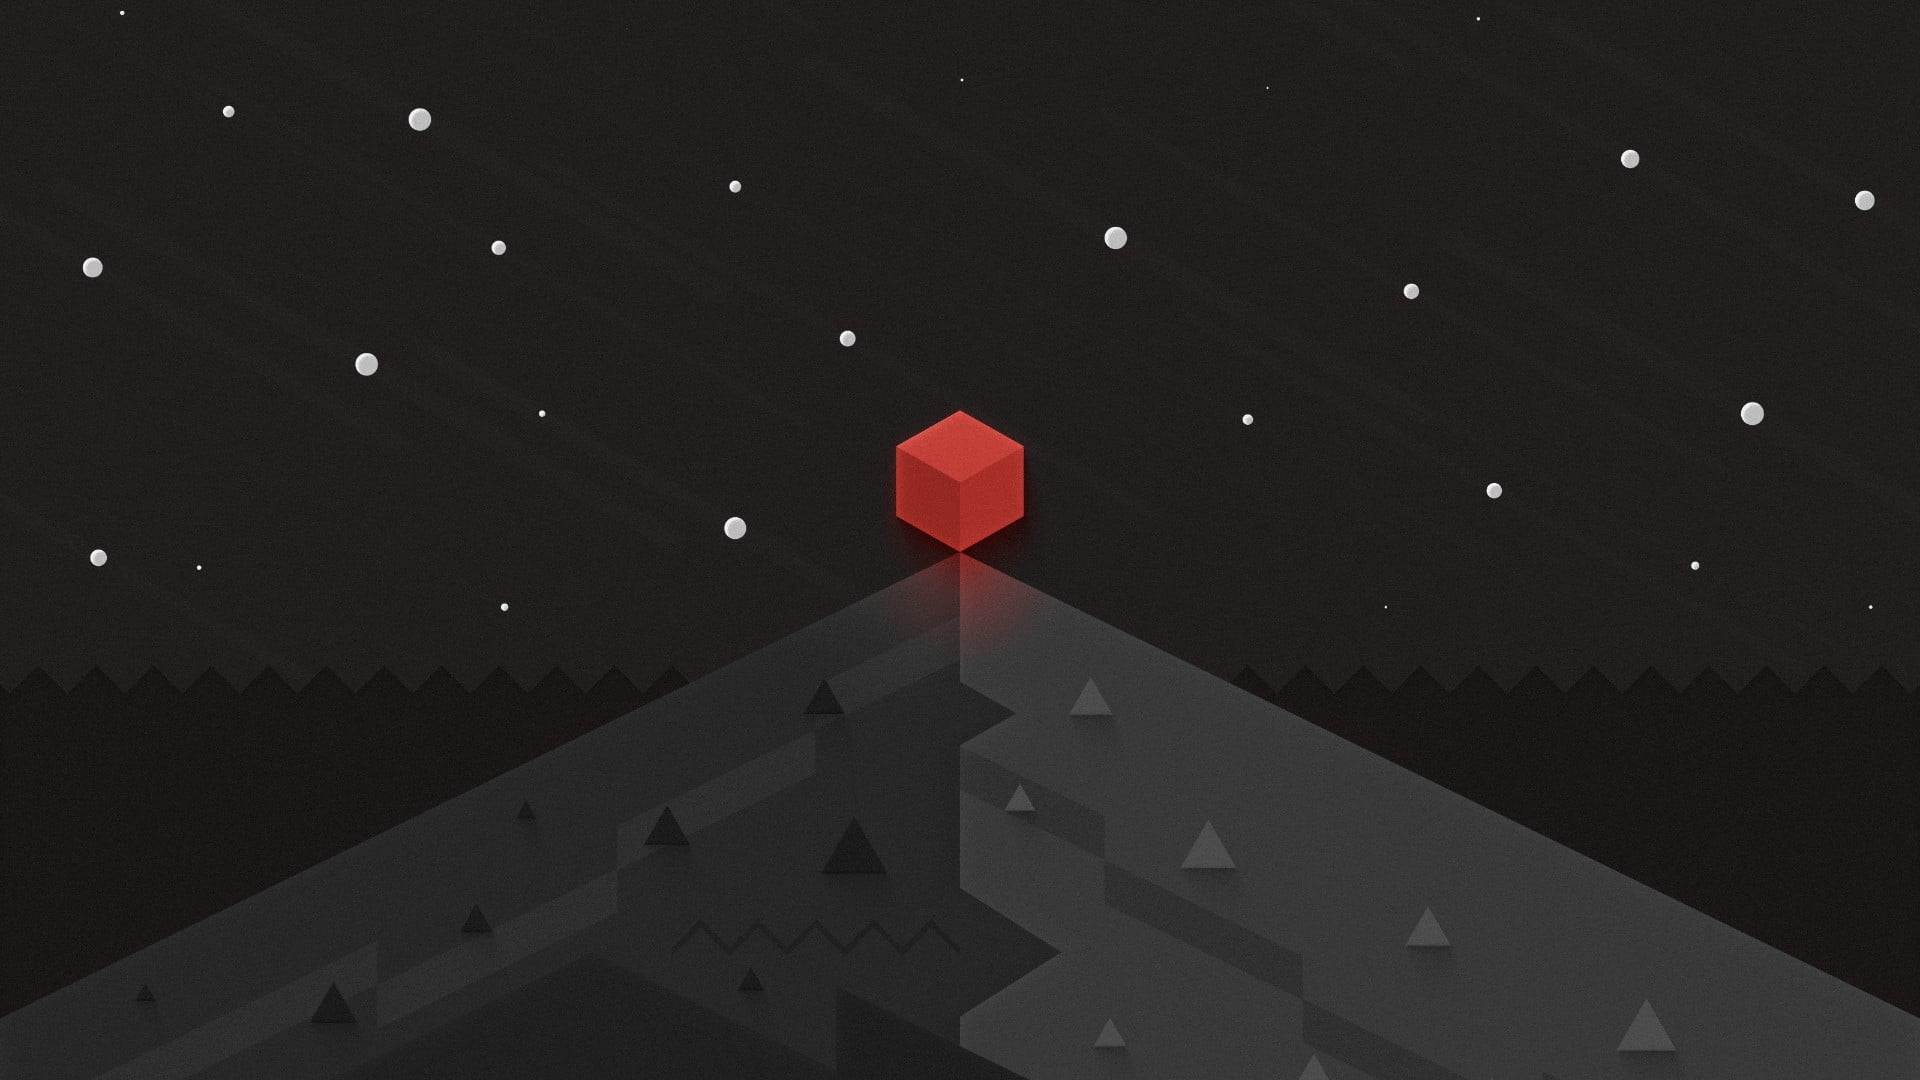 material design, hex, dark, no people, red, architecture, sky